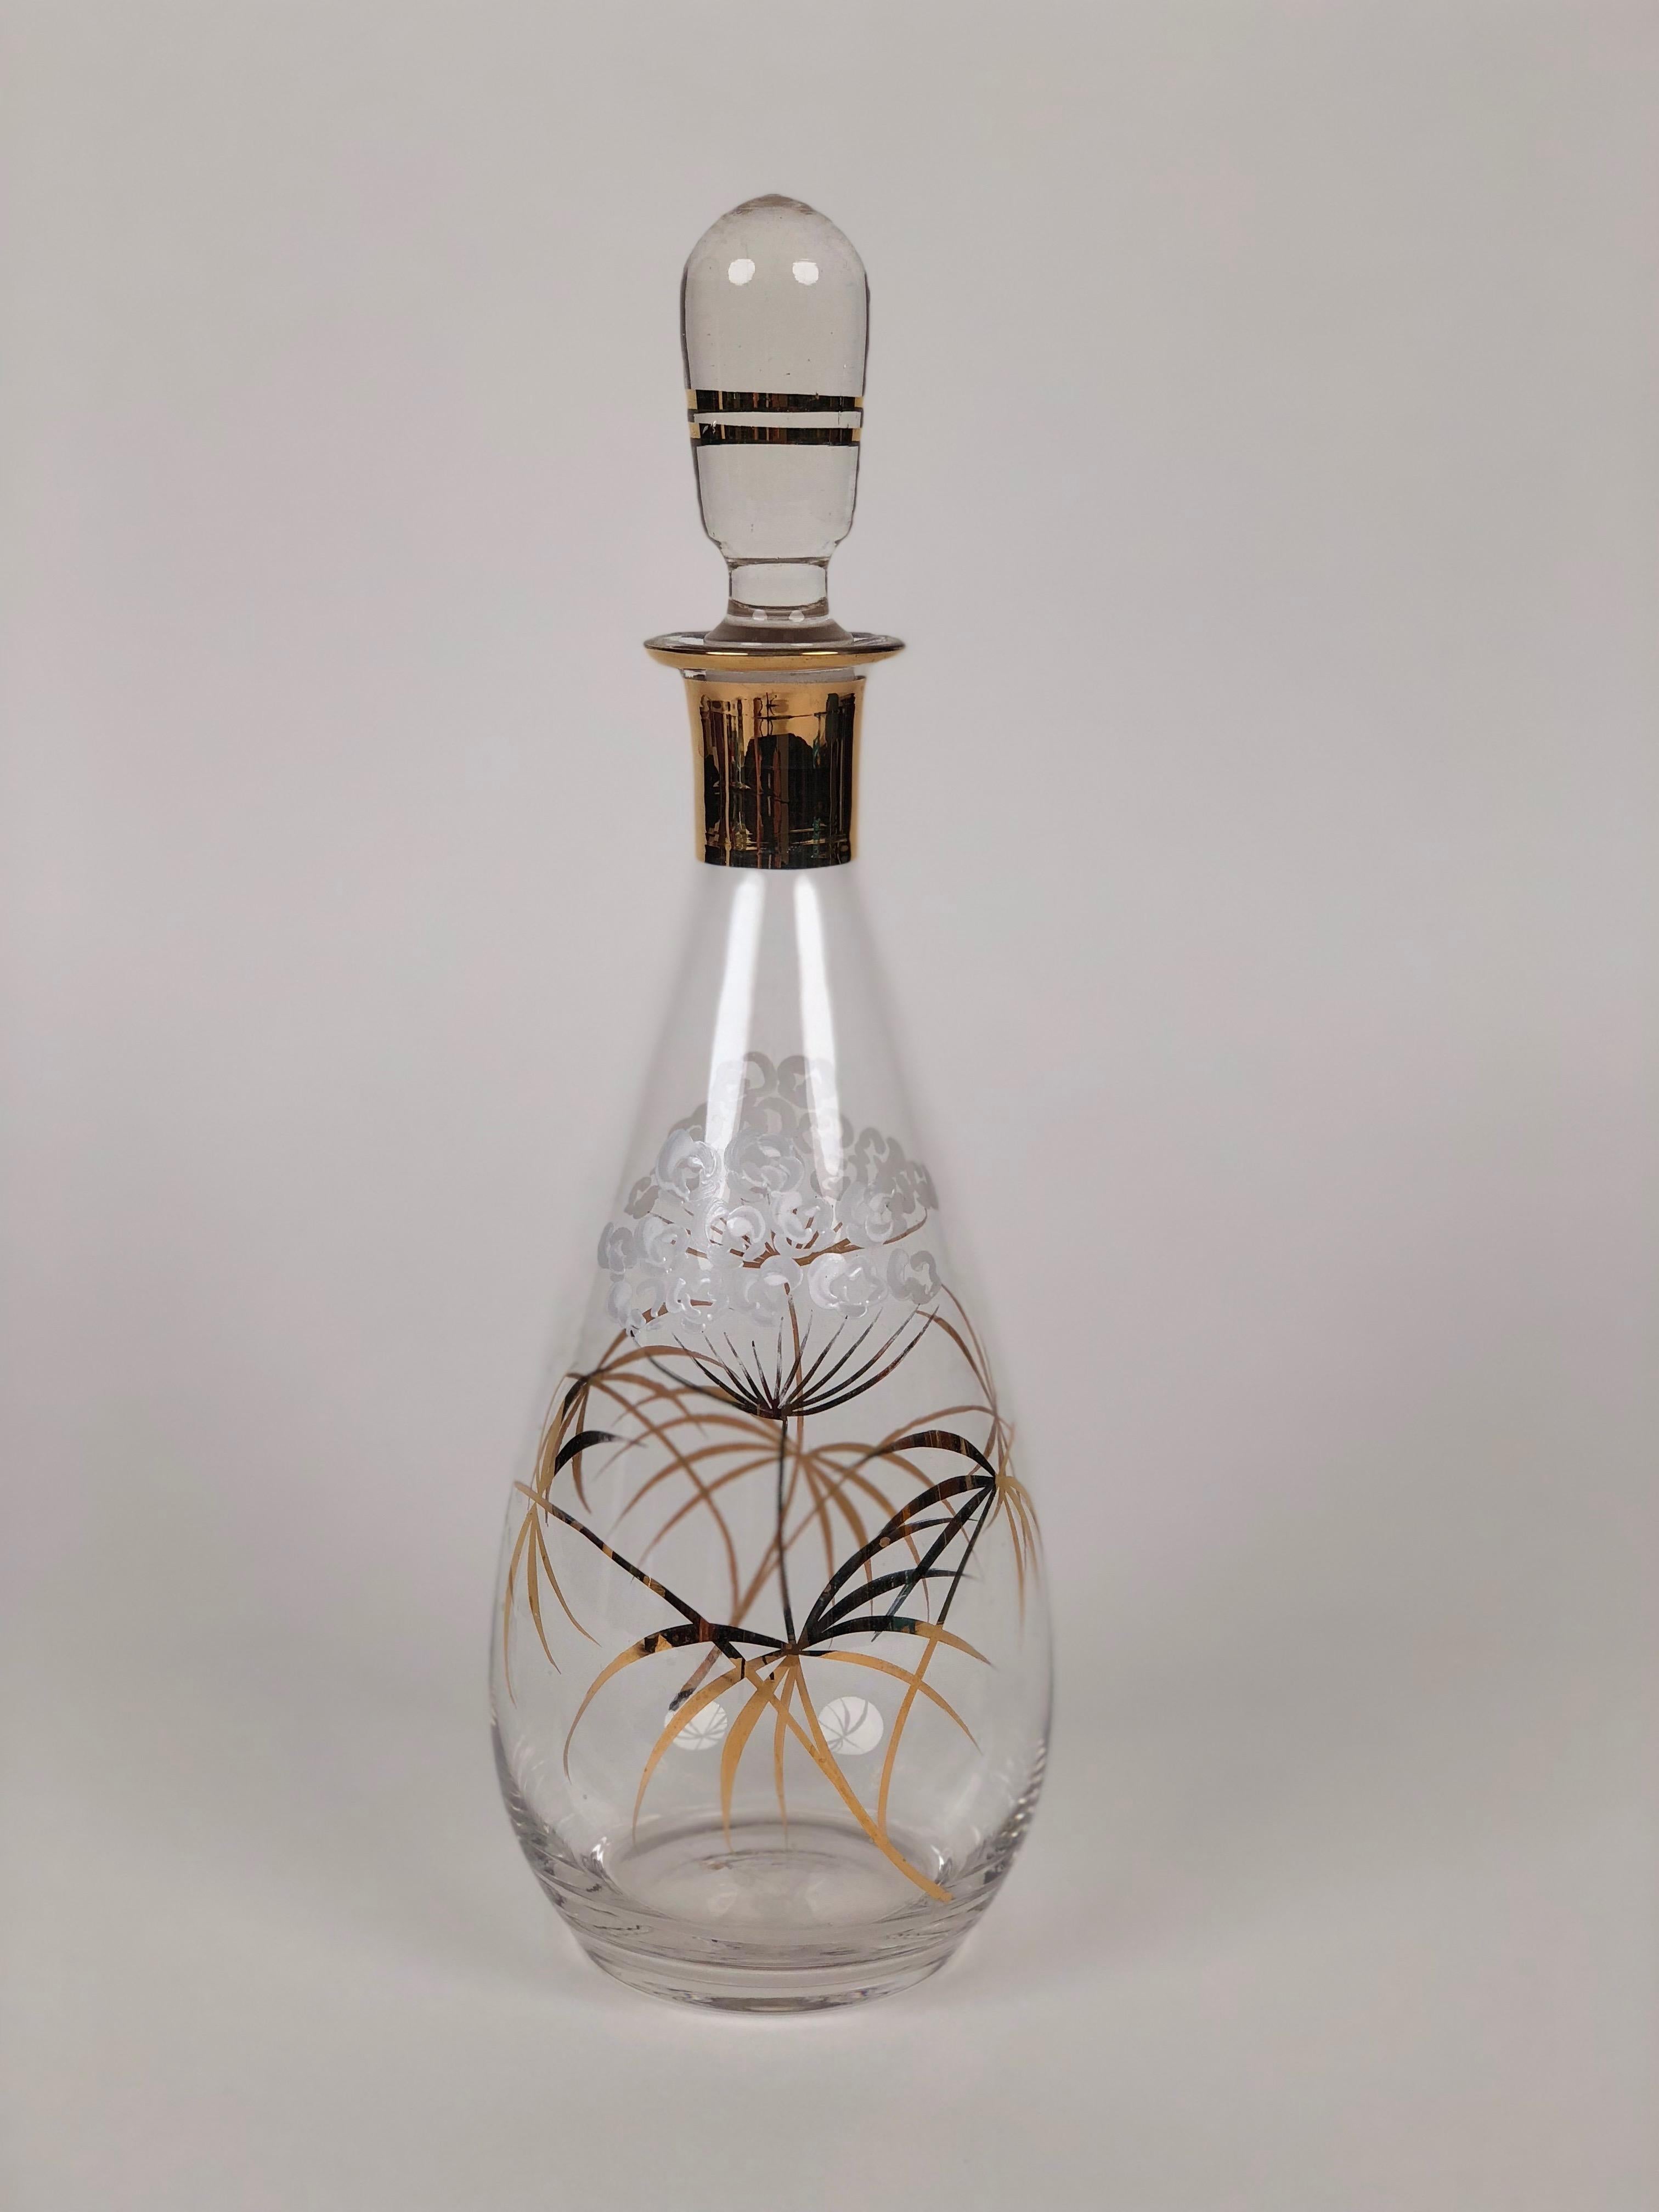 Glass Carafe for liquor with hand painted floral pattern in gold and white.
Made in Czechoslovakia.

You can use them for liquor or as a creative alternative for oils
and vinegars.